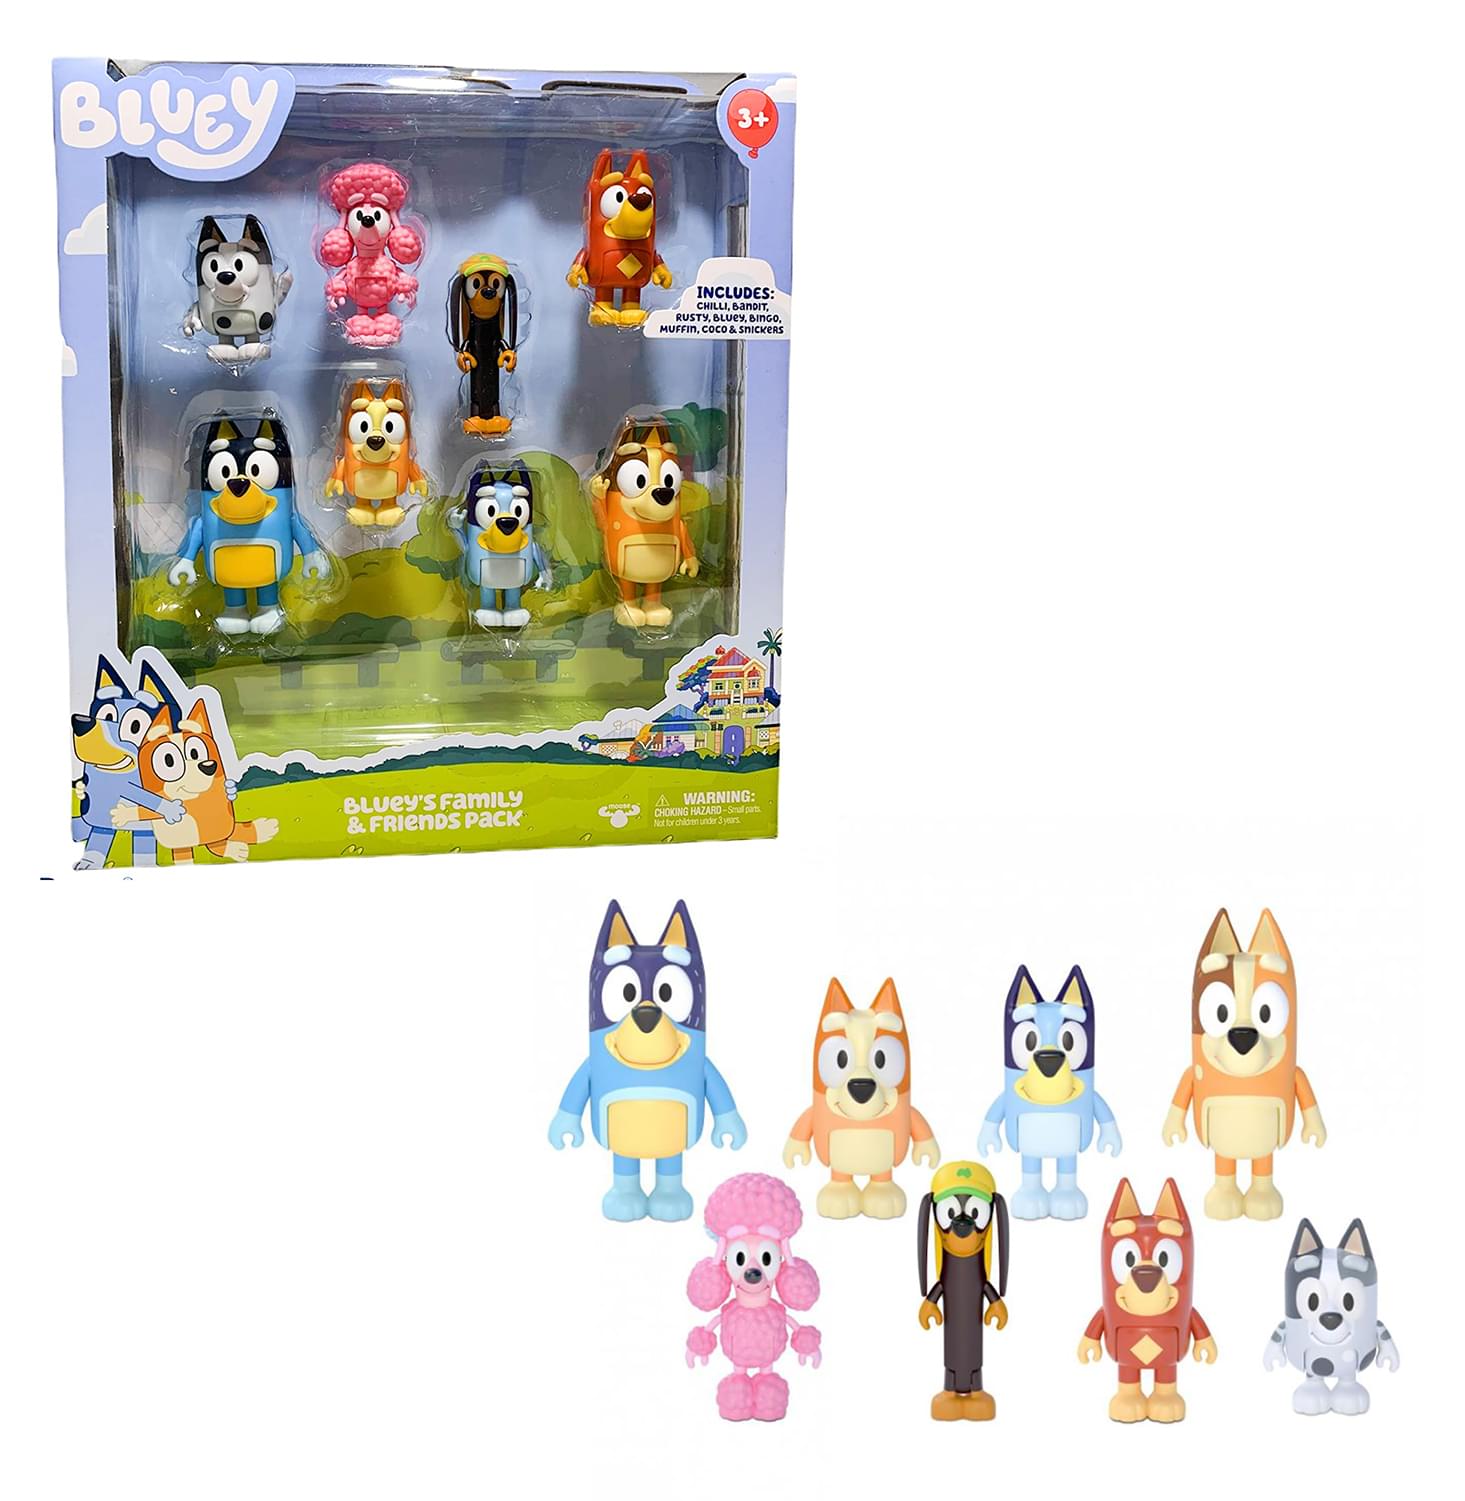 Bluey 2.5 Inch Family & Friends Action Figure 8 Pack